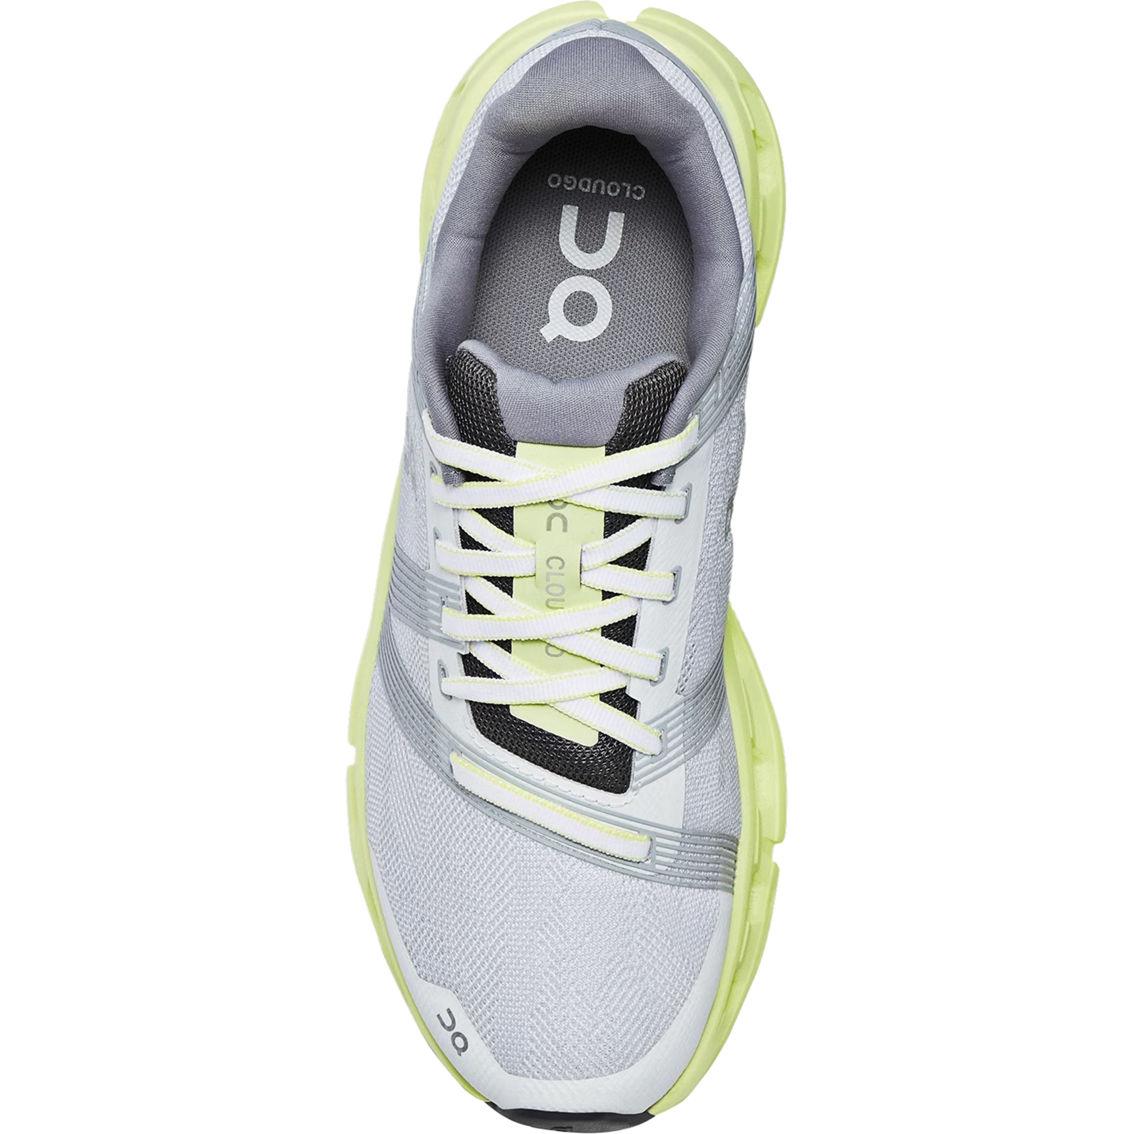 On Women's Cloudgo Running Shoes - Image 3 of 6